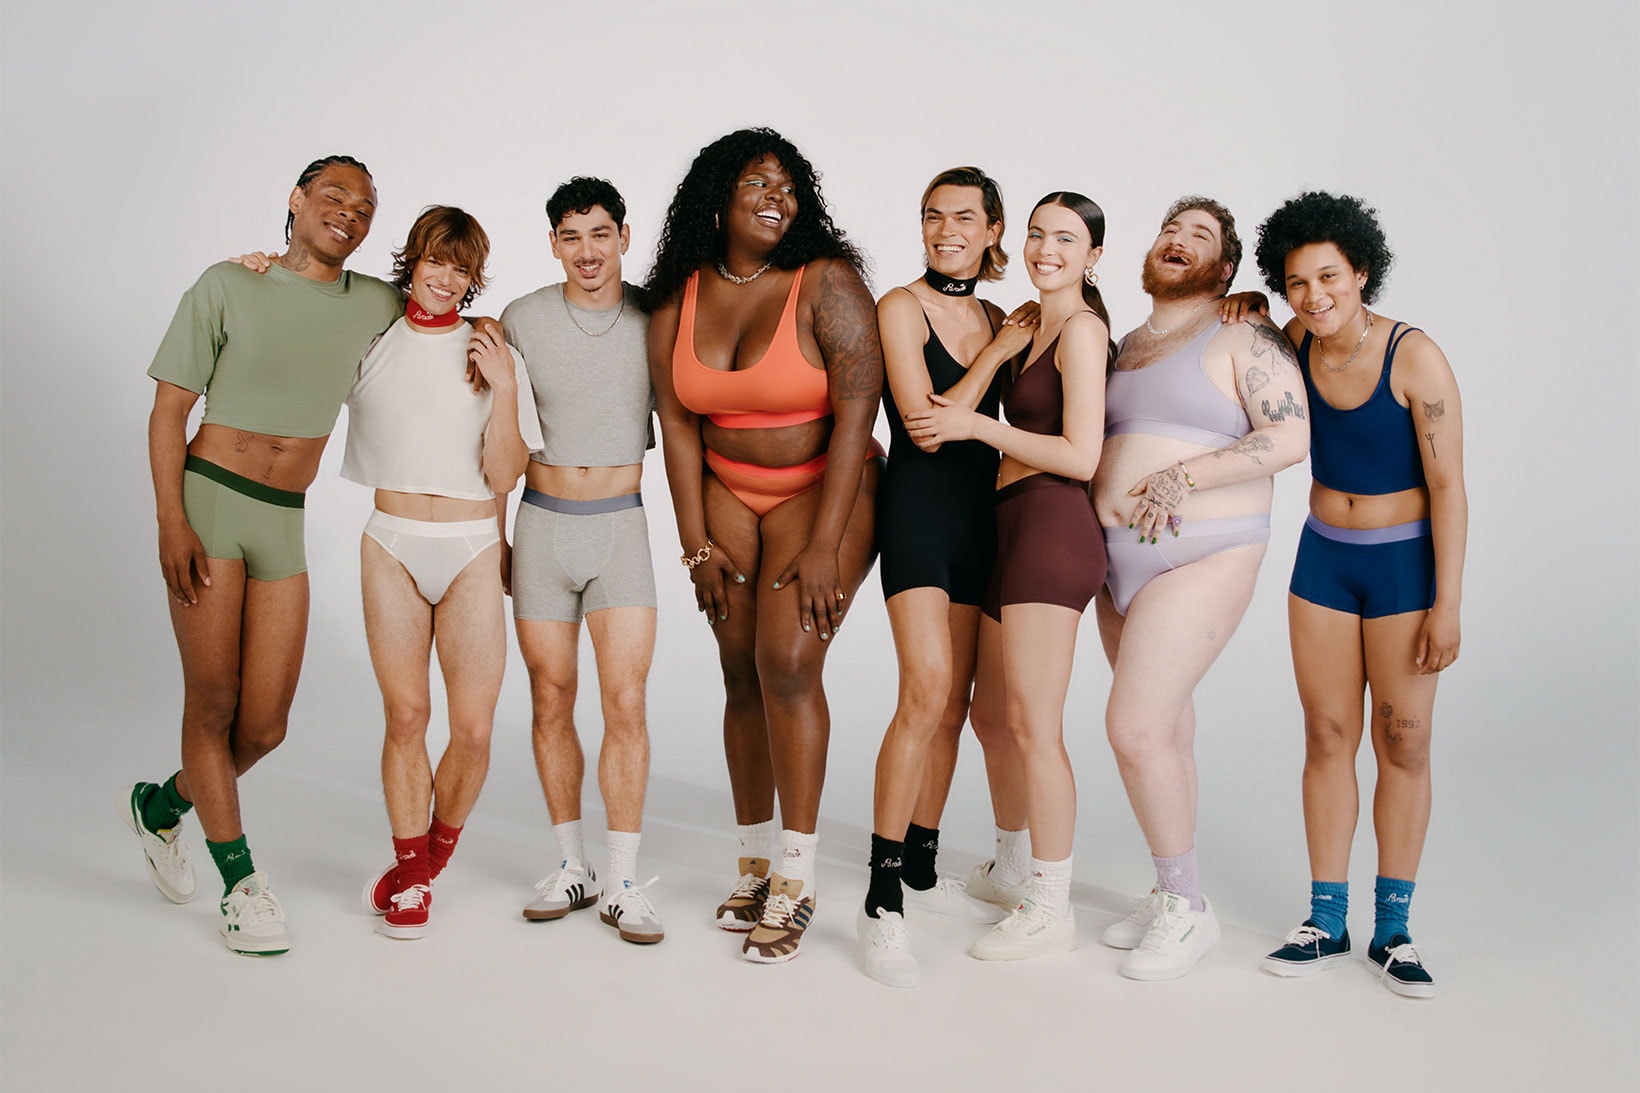 Parade Donating 1,000 Pairs of Underwear to LGBTQ+ Centers